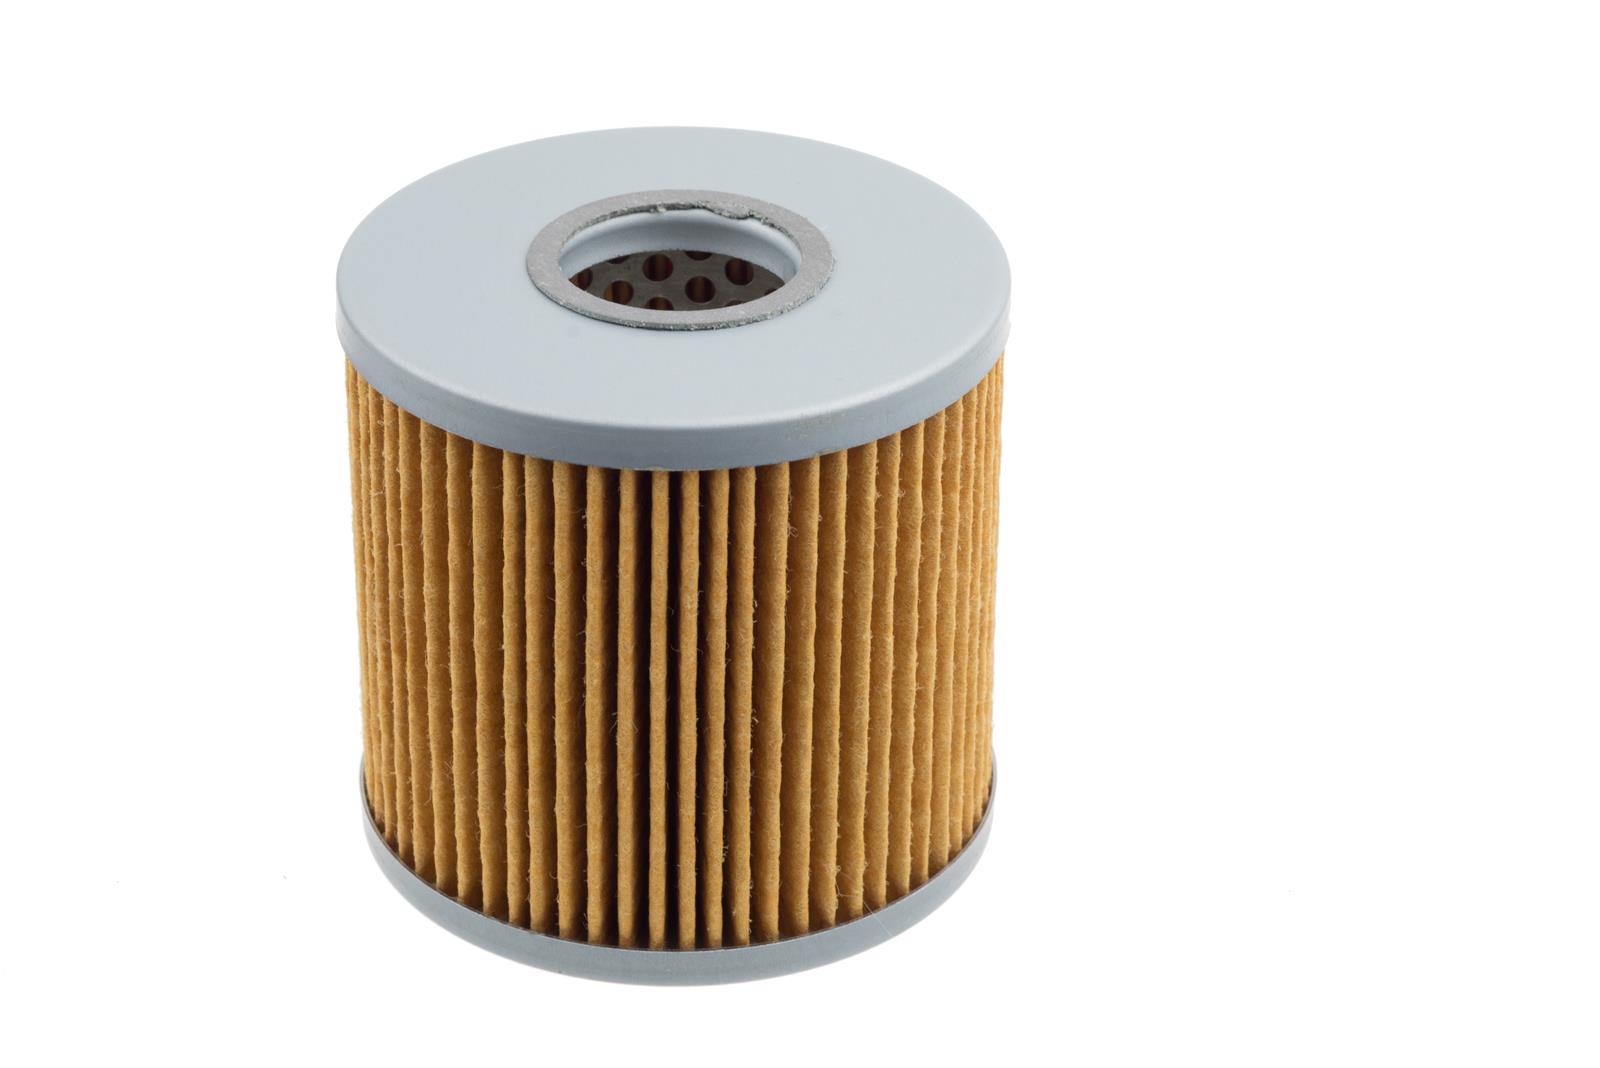 Redhorse Performance 4501-10P Fuel filter element and o-rings for 4501 series